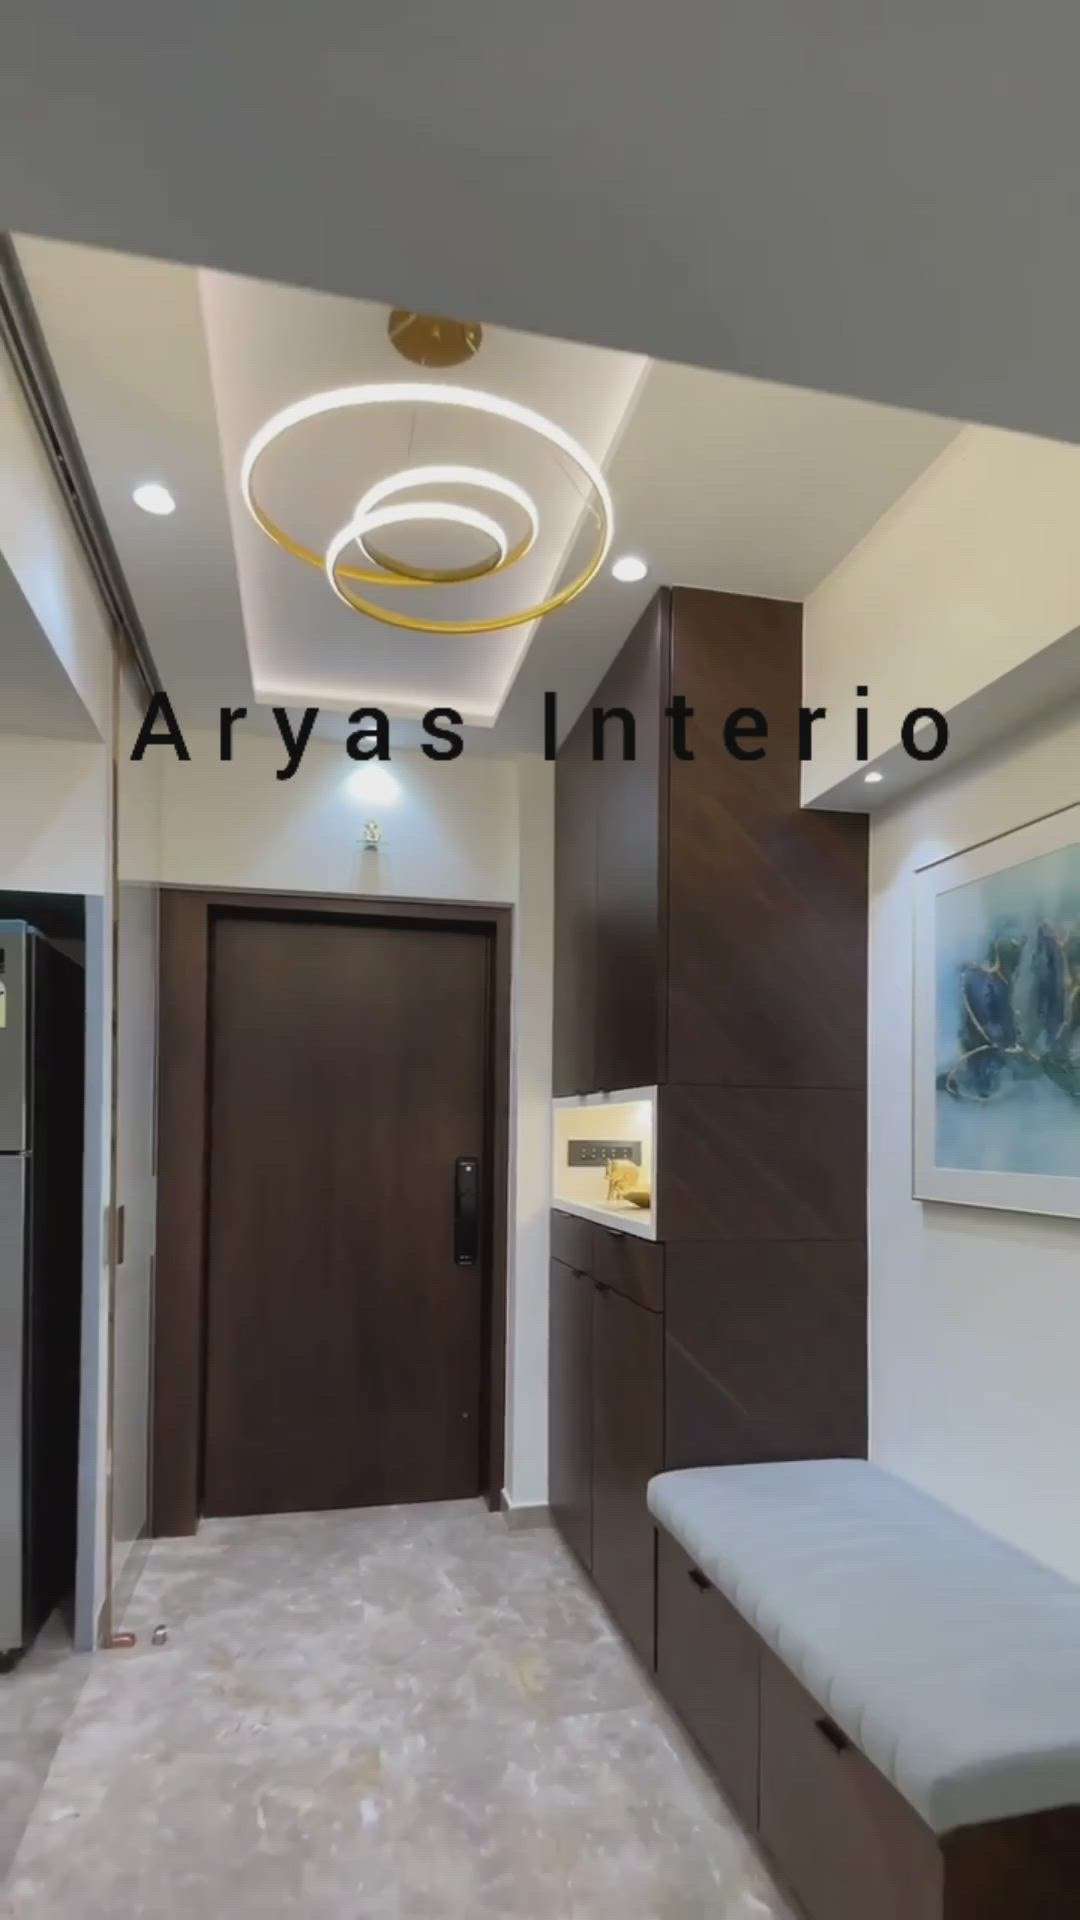 Projects completed by Aryas interio & Infra Group,
Provide complete end to end Professional Construction & interior Services in Delhi Ncr, Gurugram, Ghaziabad, Noida, Greater Noida, Faridabad, chandigarh, Manali and Shimla. Contact us right now for any interior or renovation work, call us @ +91-7018188569 &
Visit our website at www.designinterios.com
Follow us on Instagram #aryasinterio and Facebook @aryasinterio .
#uttarpradesh #Delhihome #delhi #himachal 
#noidainterior #noida #delhincr  #noidaconstruction #interiordesign #interior #interiors #interiordesigner #interiordecor #interiorstyling #delhiinteriors #greaternoida #faridabad #ghaziabadinterior #ghaziabad  #chandigarh